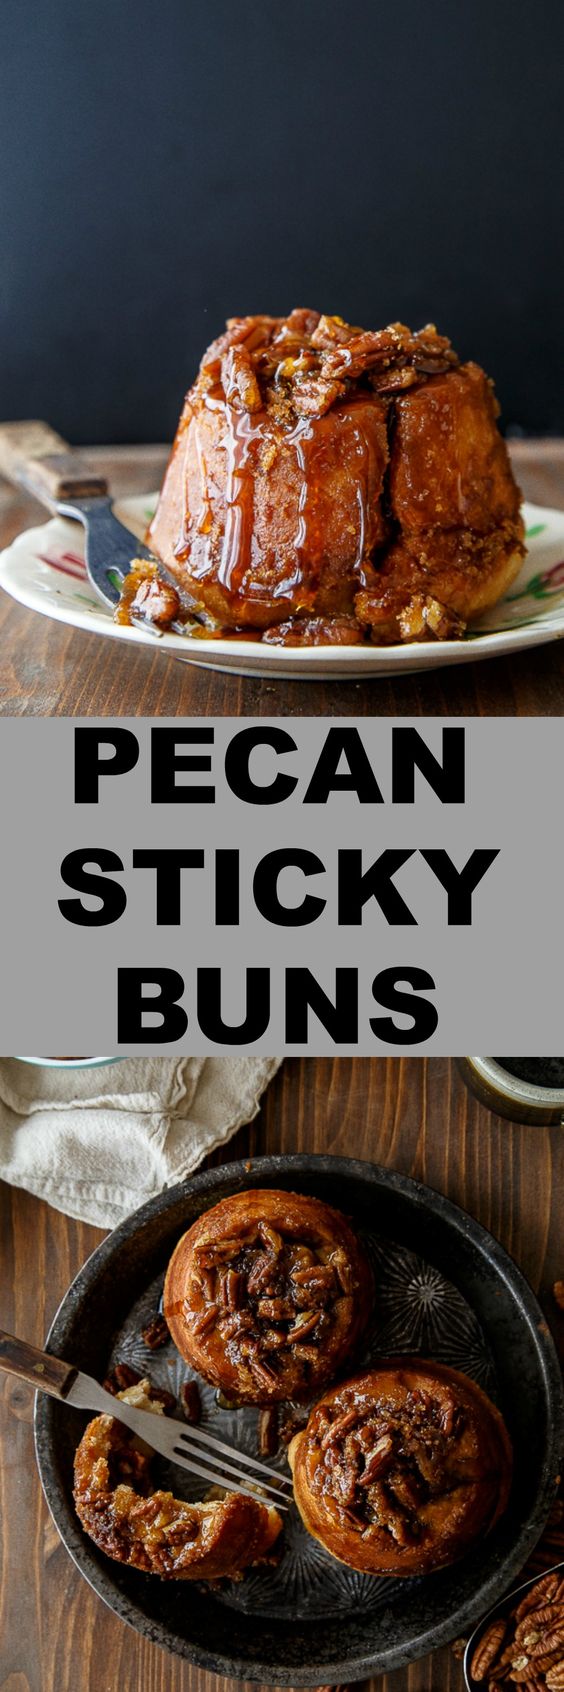 Pecan sticky buns! This recipe for sticky buns is made in a muffin pan, and comes out perfectly every time! #stickybuns #pecanstickybuns #smallbatch